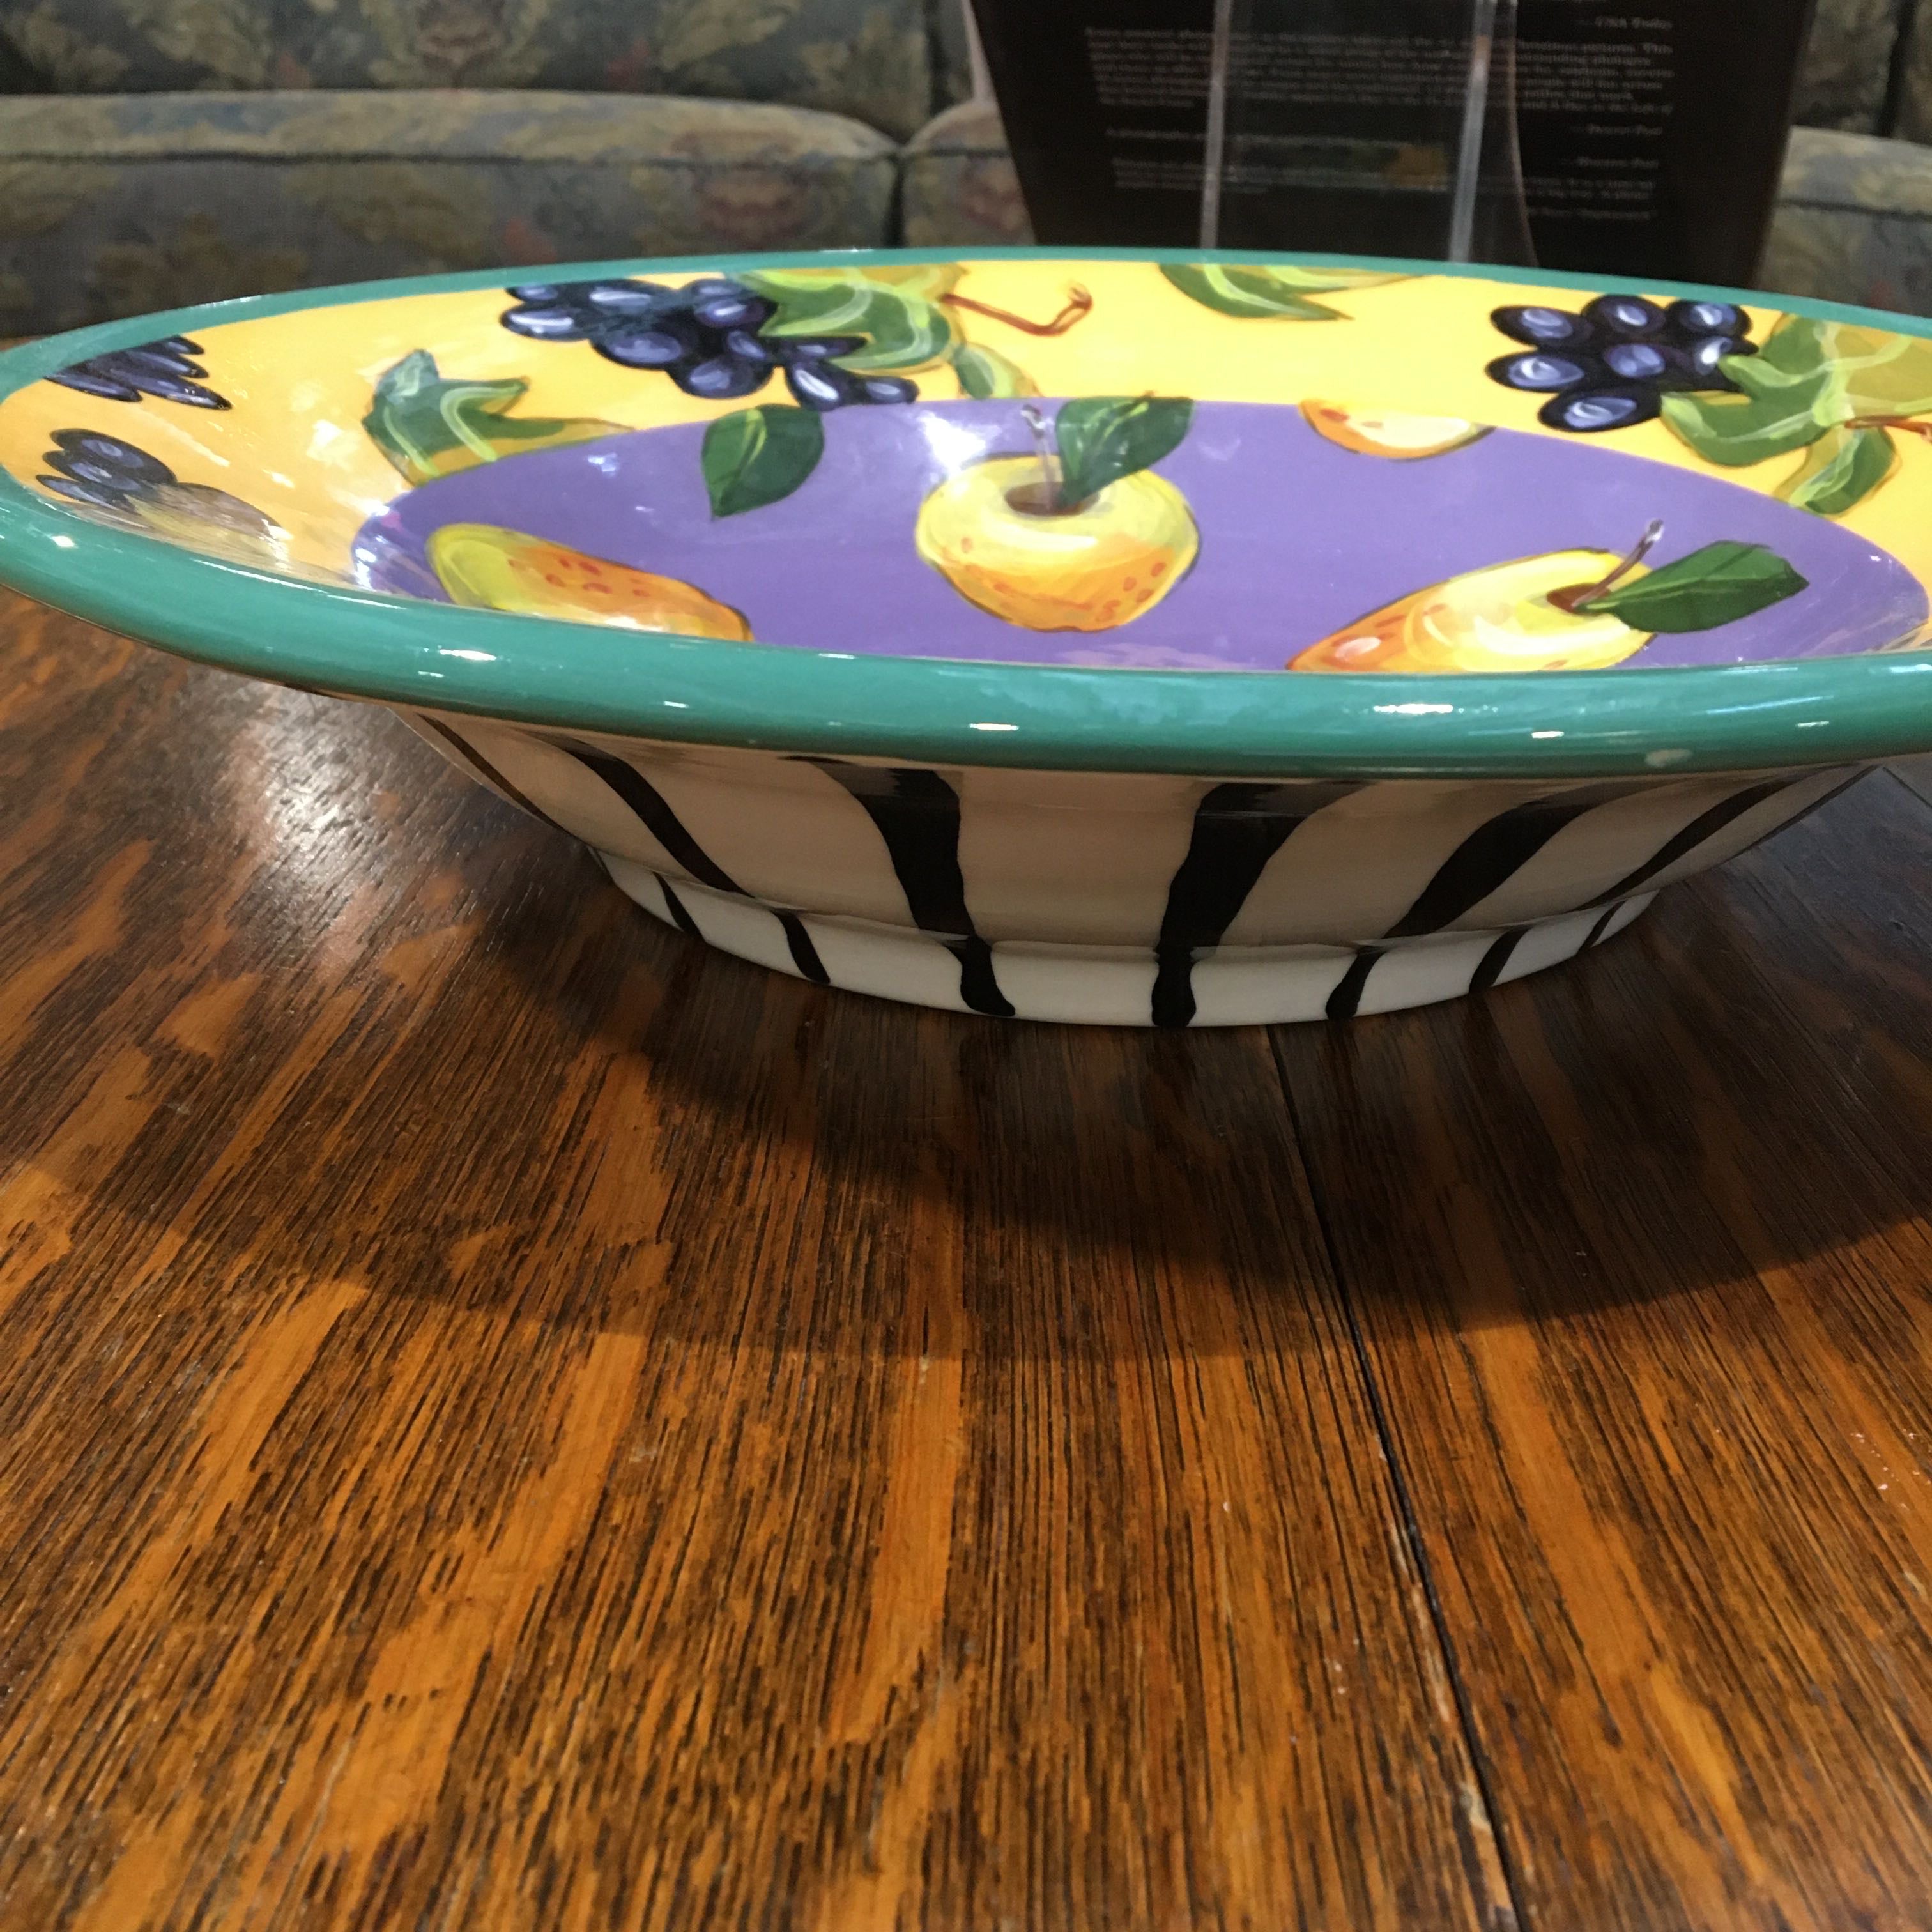 Droll Designs Vintage Grapes and Olives Bowl Pears